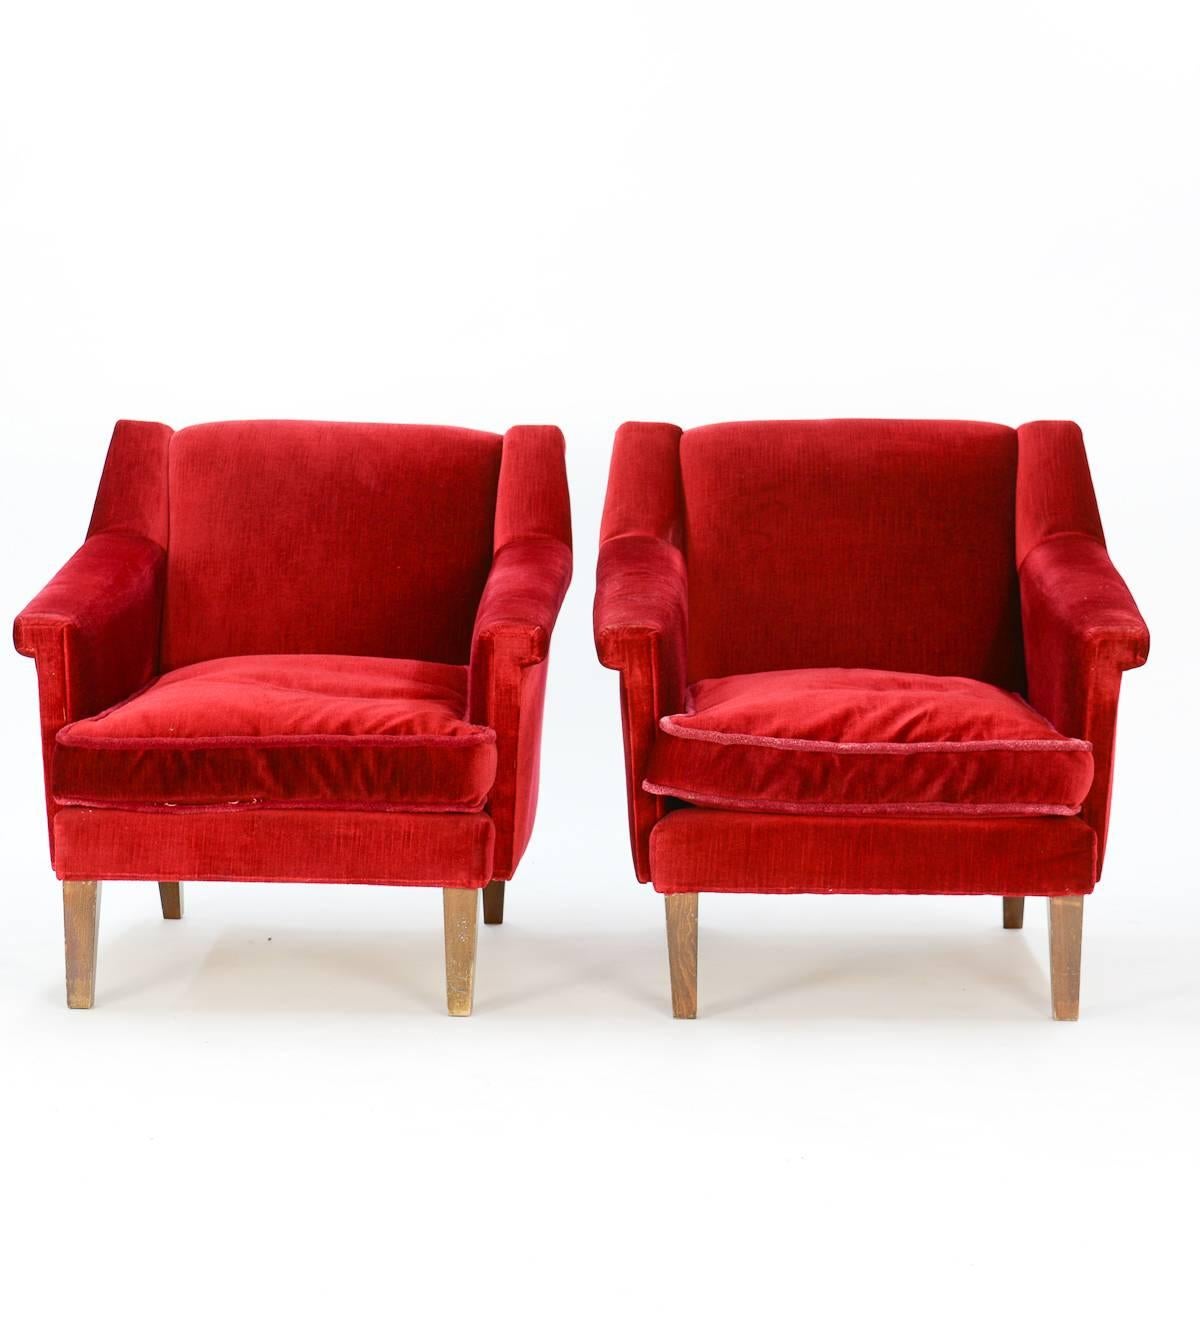 These regal 3/4-back club chairs in red velvet were imported to the U.S directly from Denmark.  Superbly comfortable and cozy to enjoy any day of the week - or lounging on the weekend